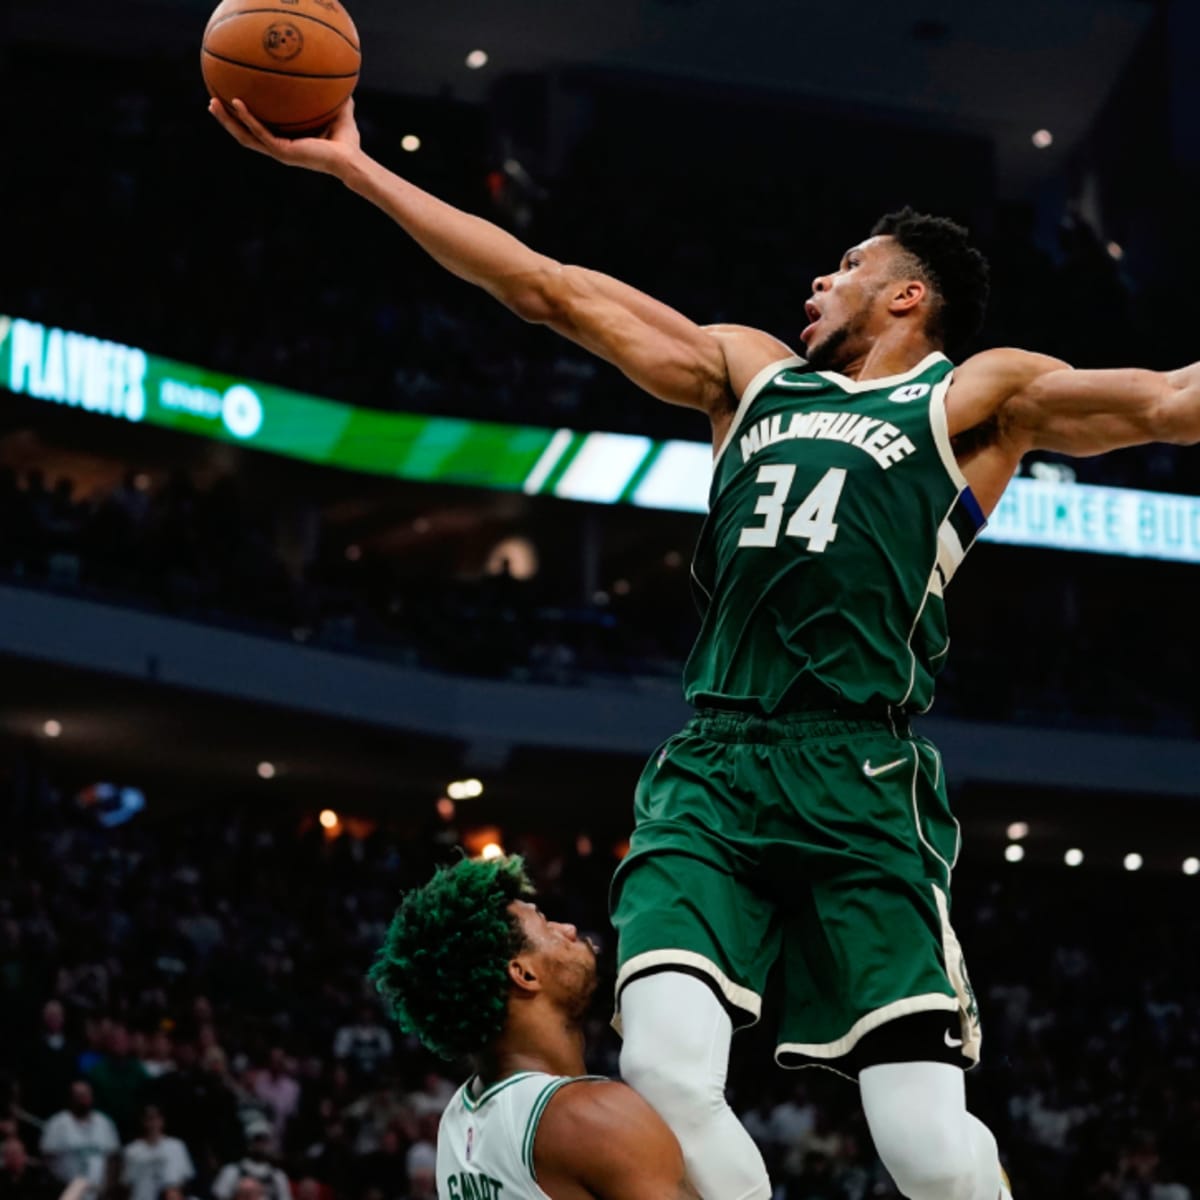 CBS Sports HQ on X: Here's what Giannis Antetokounmpo has accomplished in  the last 4 years: • Most Improved Player (2017) • Most Valuable Player  (2019) • Most Valuable Player (2020) •